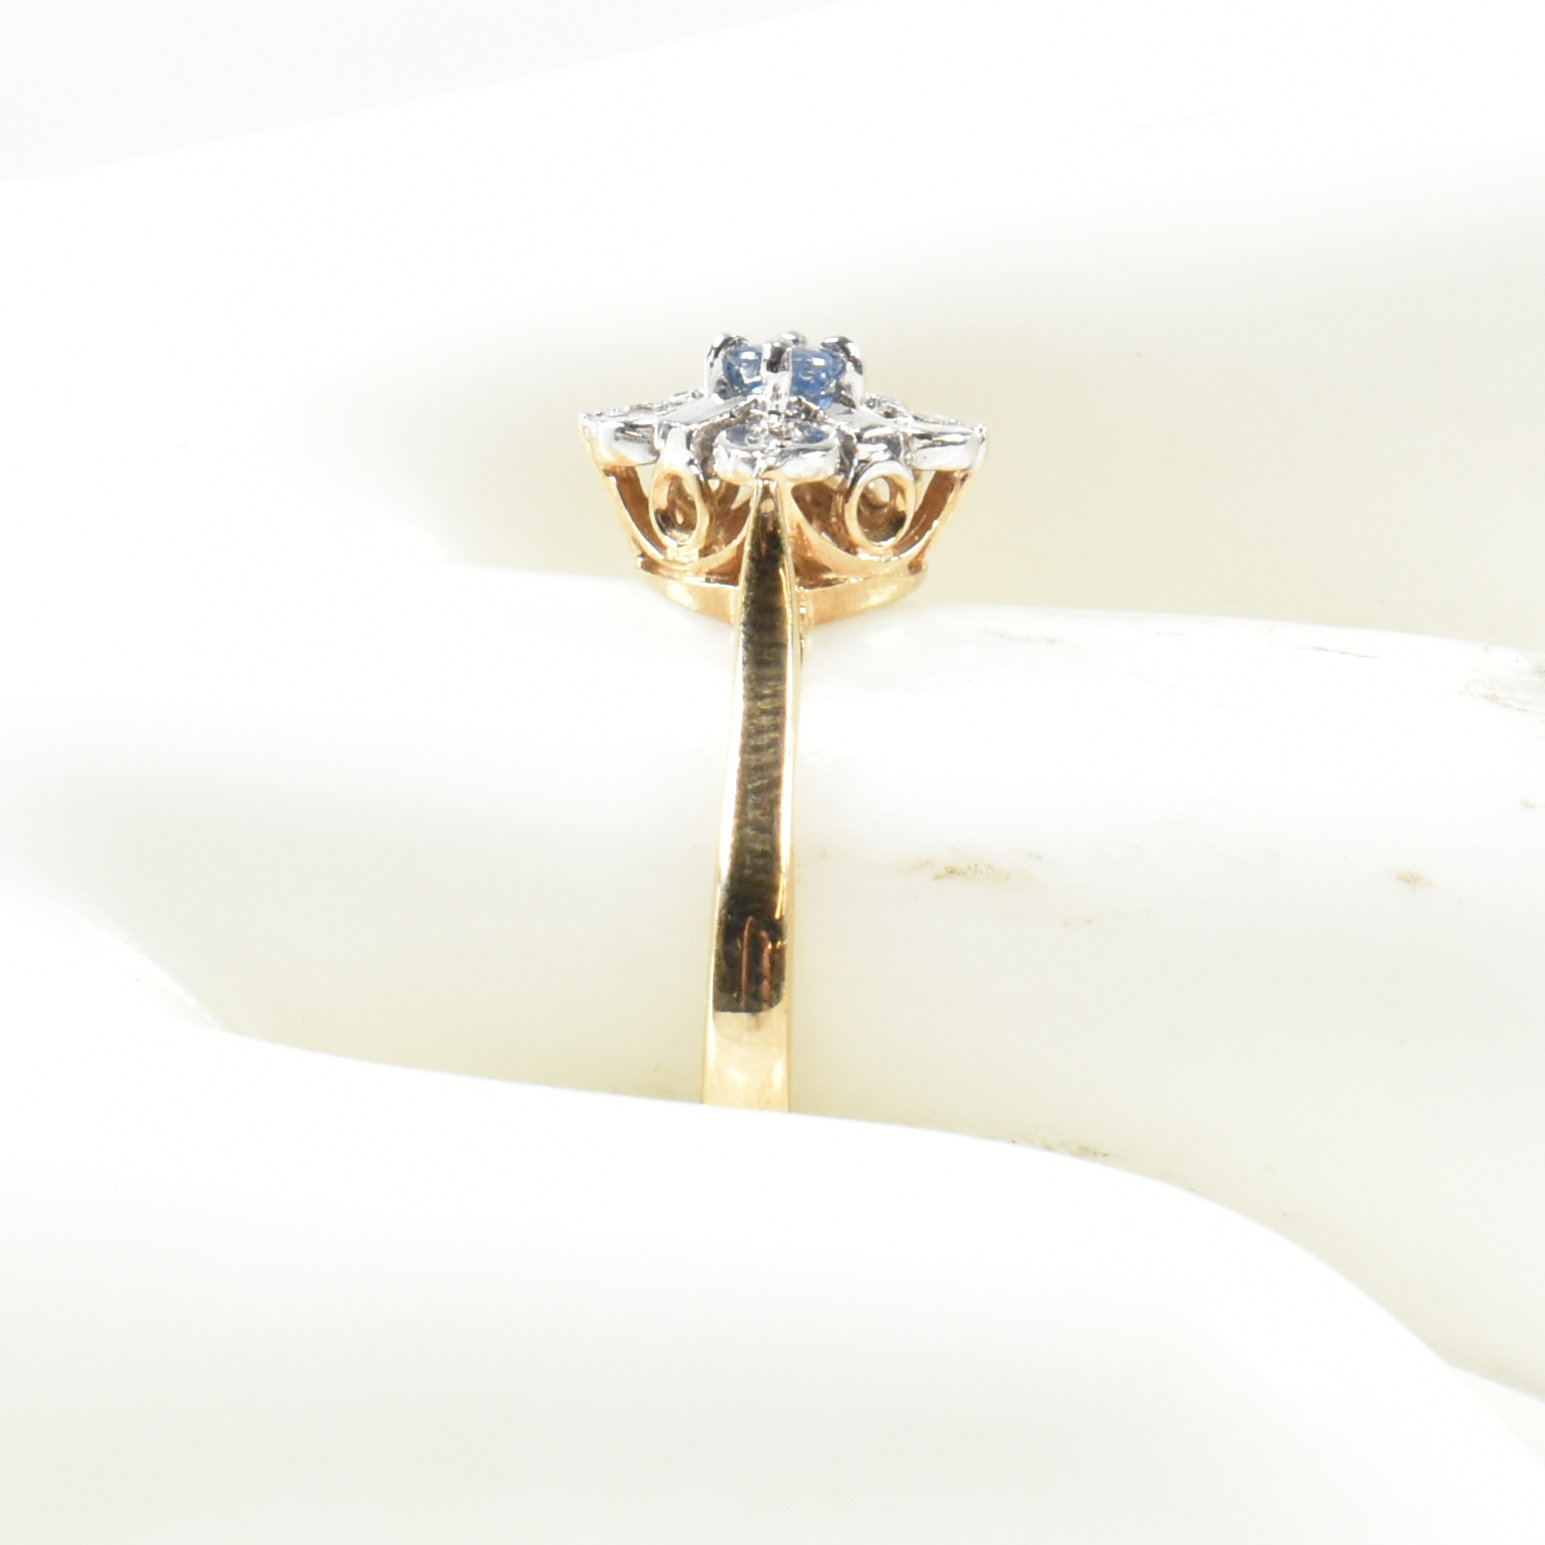 HALLMARKED 9CT GOLD SAPPHIRE & DIAMOND CLUSTER RING - Image 9 of 9